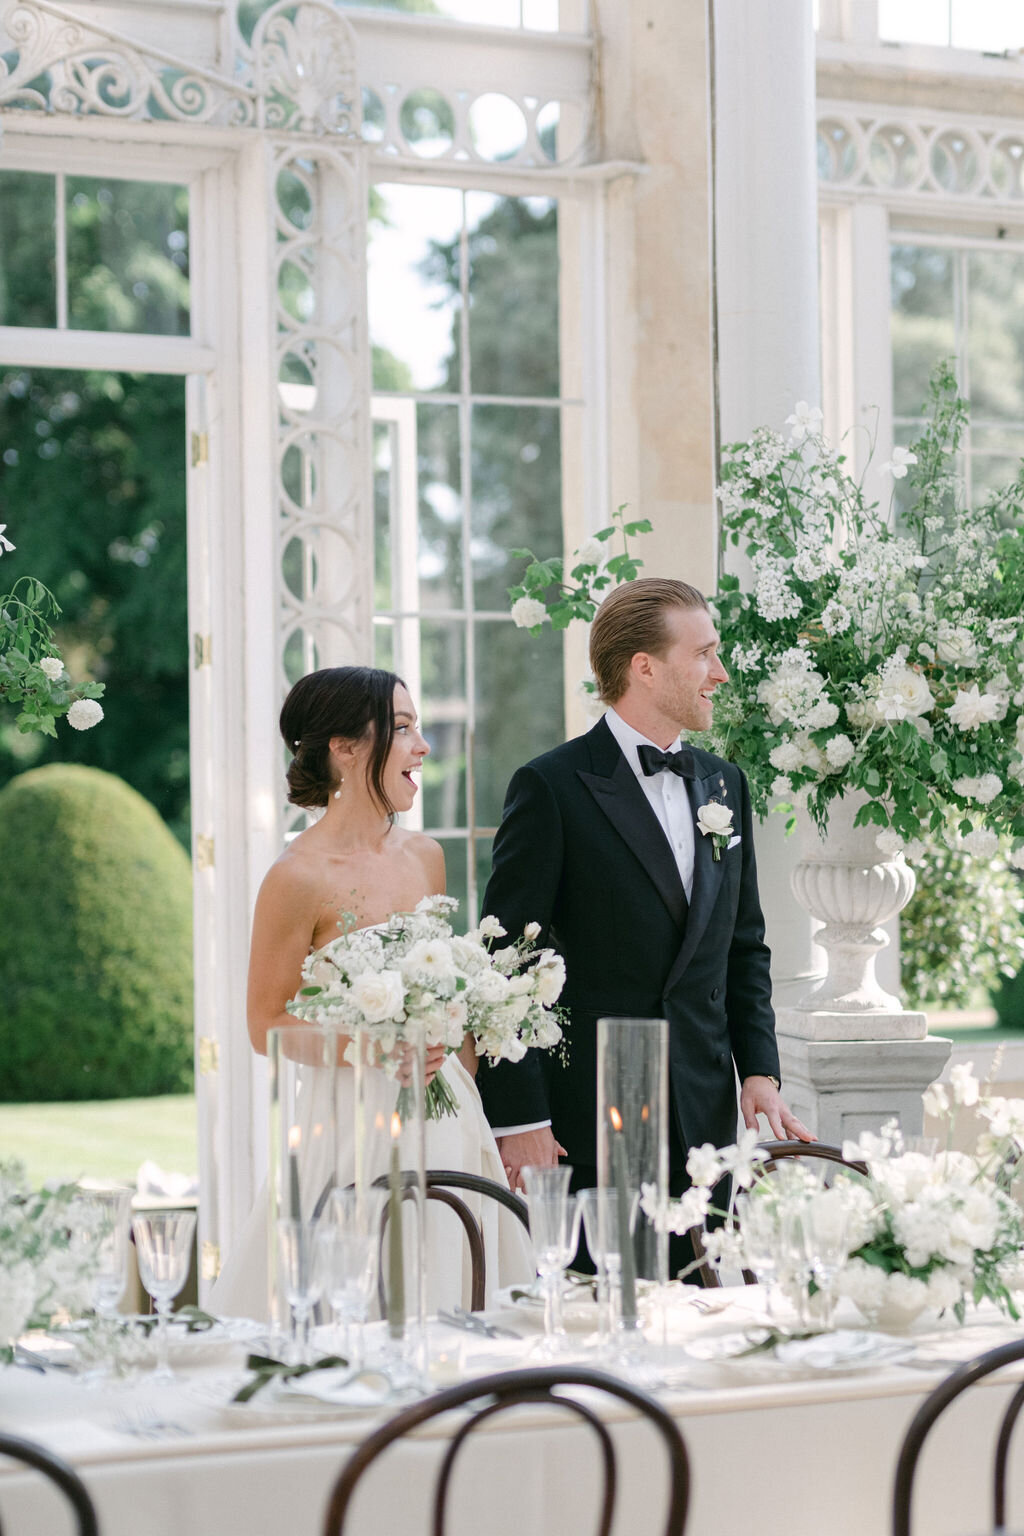 Attabara Studio UK Luxury Wedding Planners at Syon Park & with Charlotte Wise0862